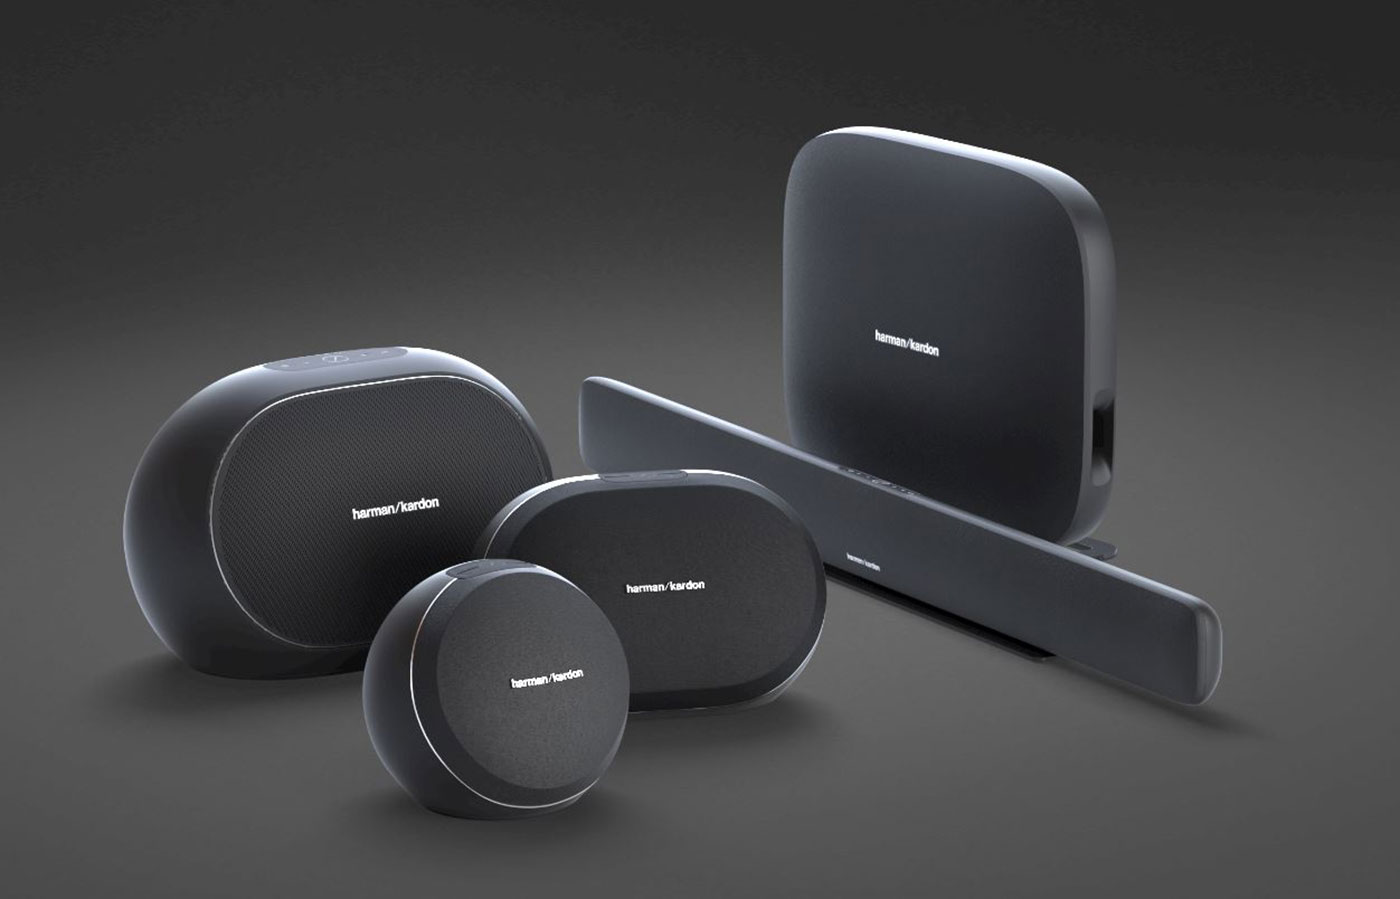 Google Cast now by Harman Kardon speakers - Android Authority